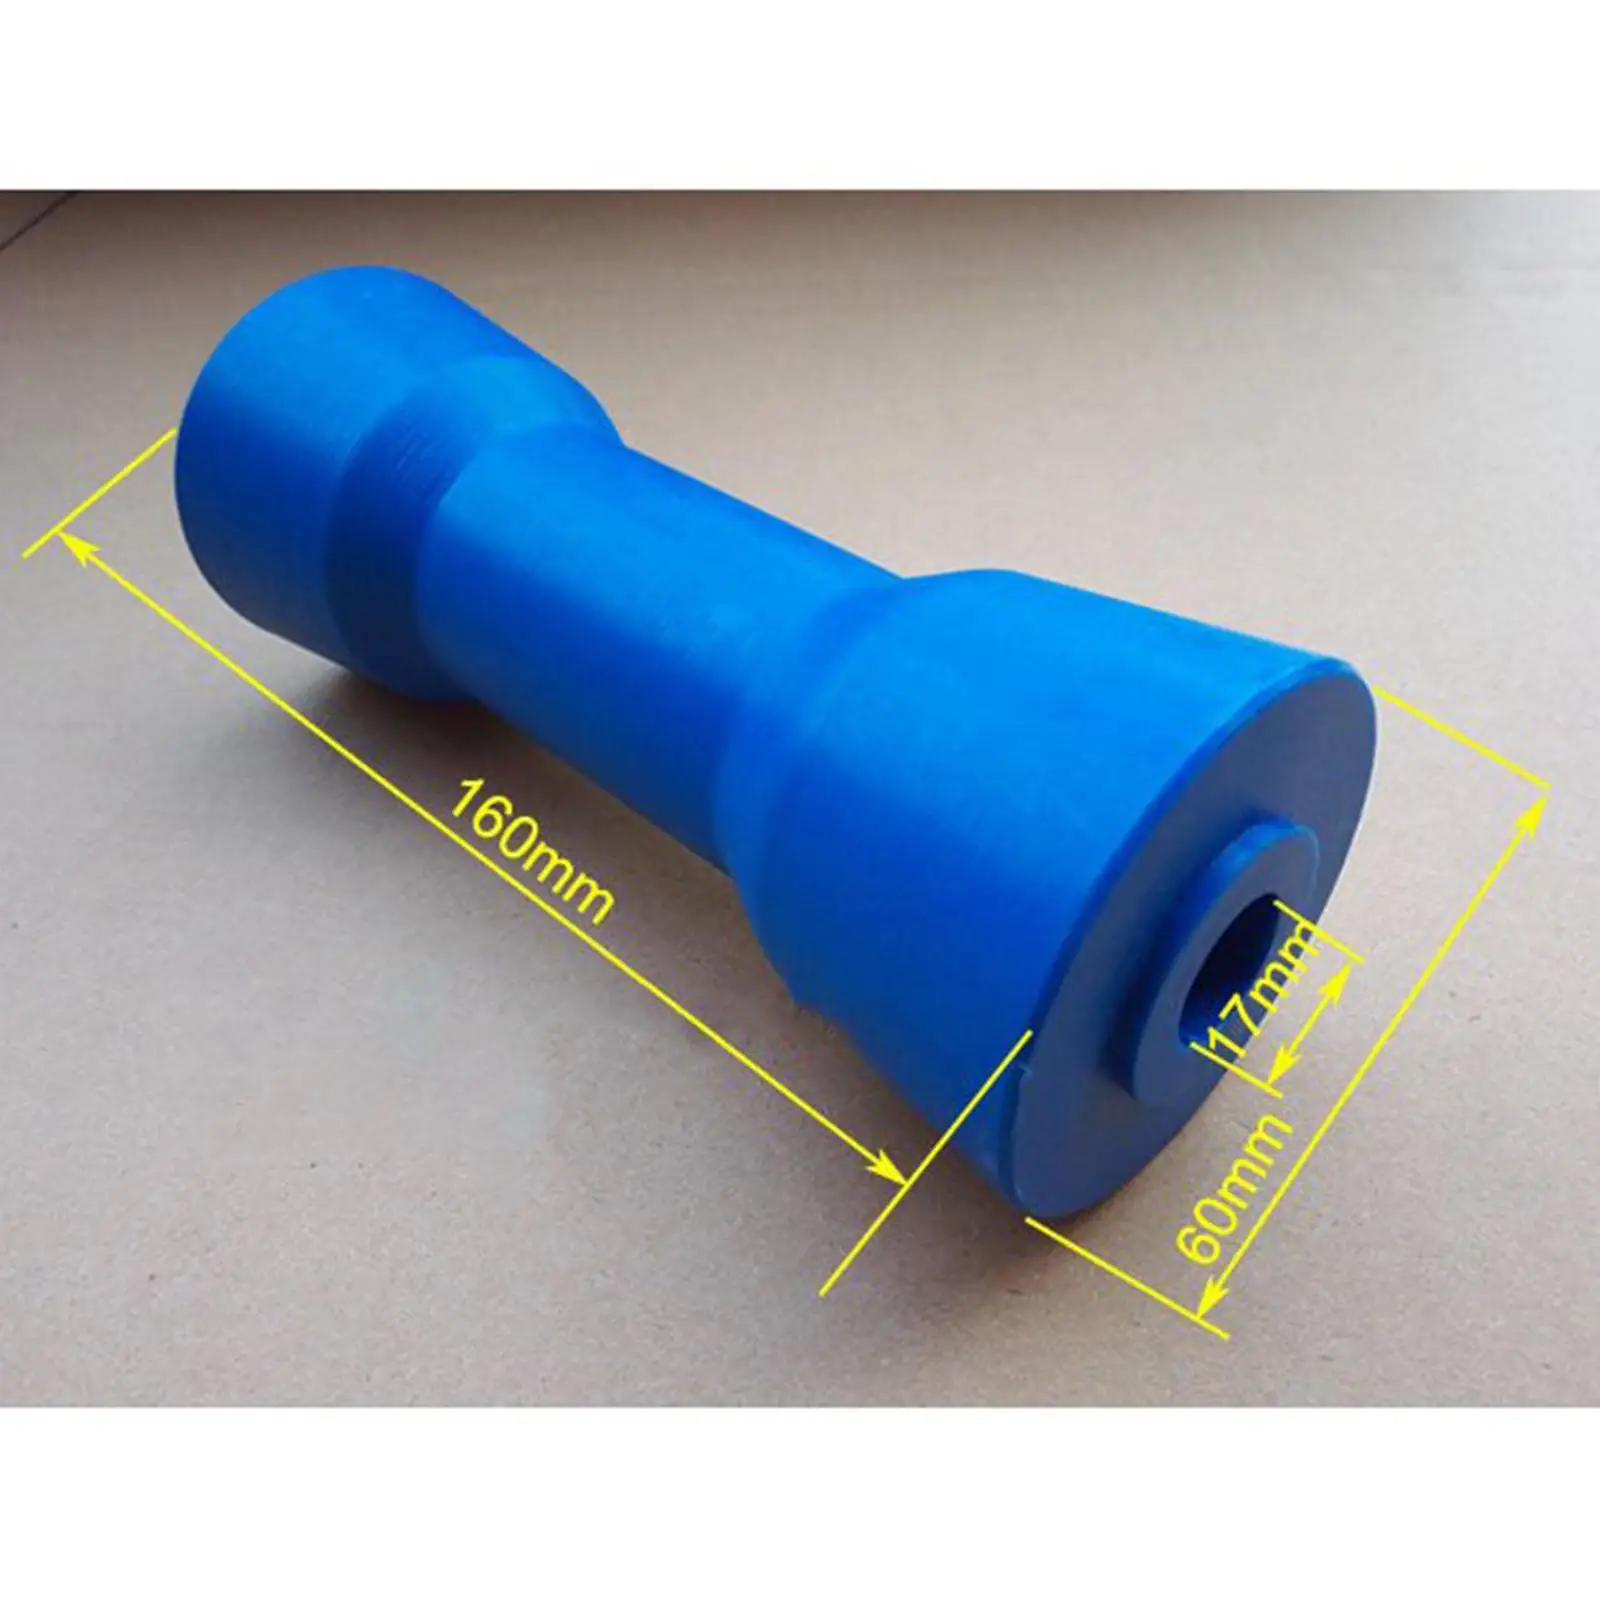 Heavy Duty Boat Trailer Keel Roller Assembly 160mm 17mm Bore Bow Roller for Dinghy Boat Trailers Hardware